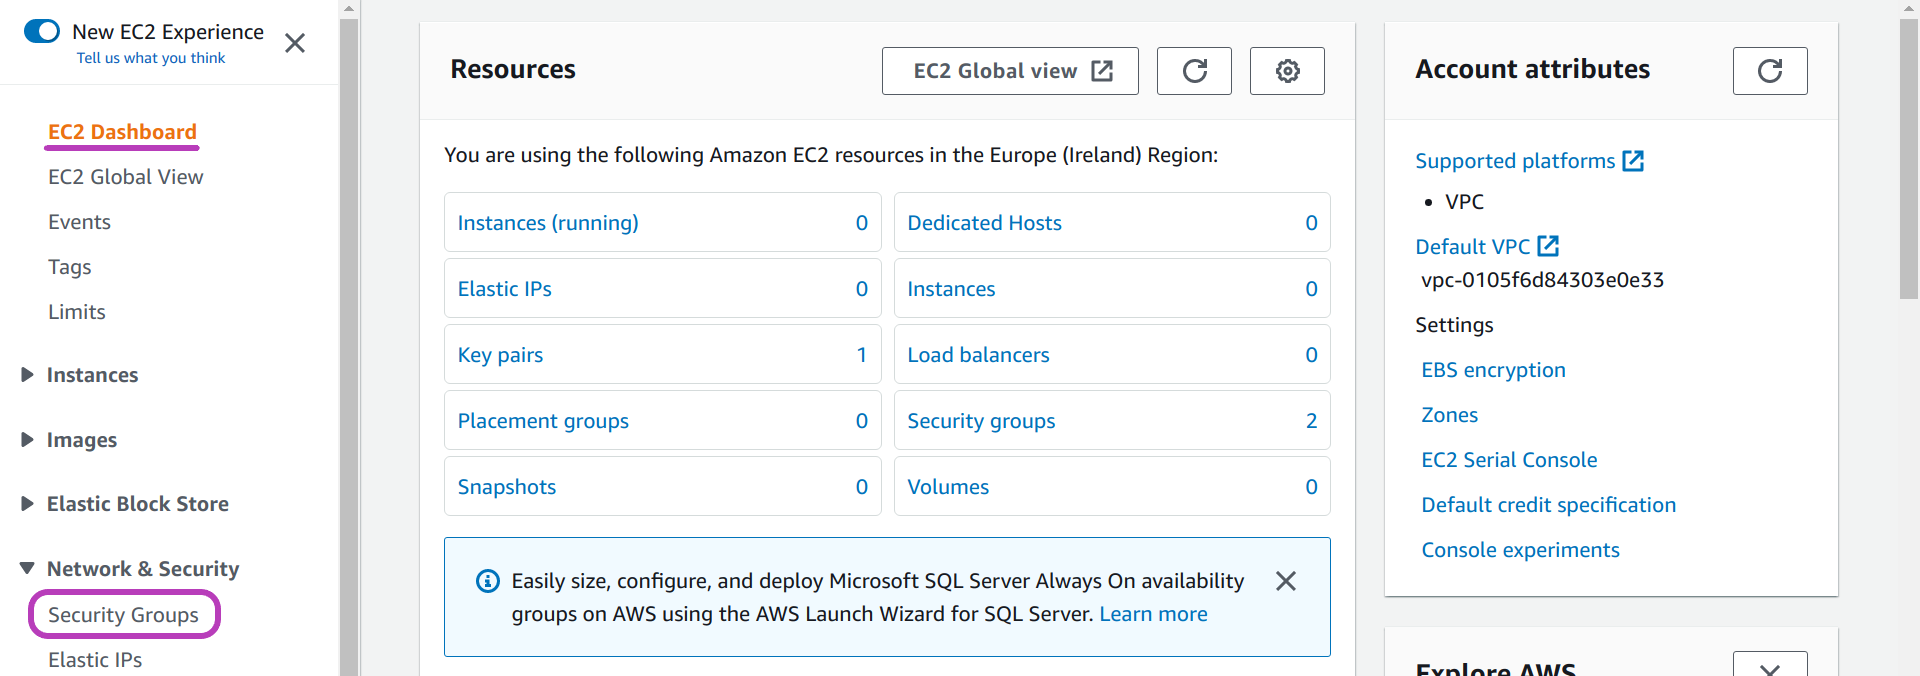 Screenshot of AWS Console "EC2 Dashboard" page in a browser with the heading "EC2 Dashboard" on the top left underlined, and the option "Security Groups" on bottom left circled.